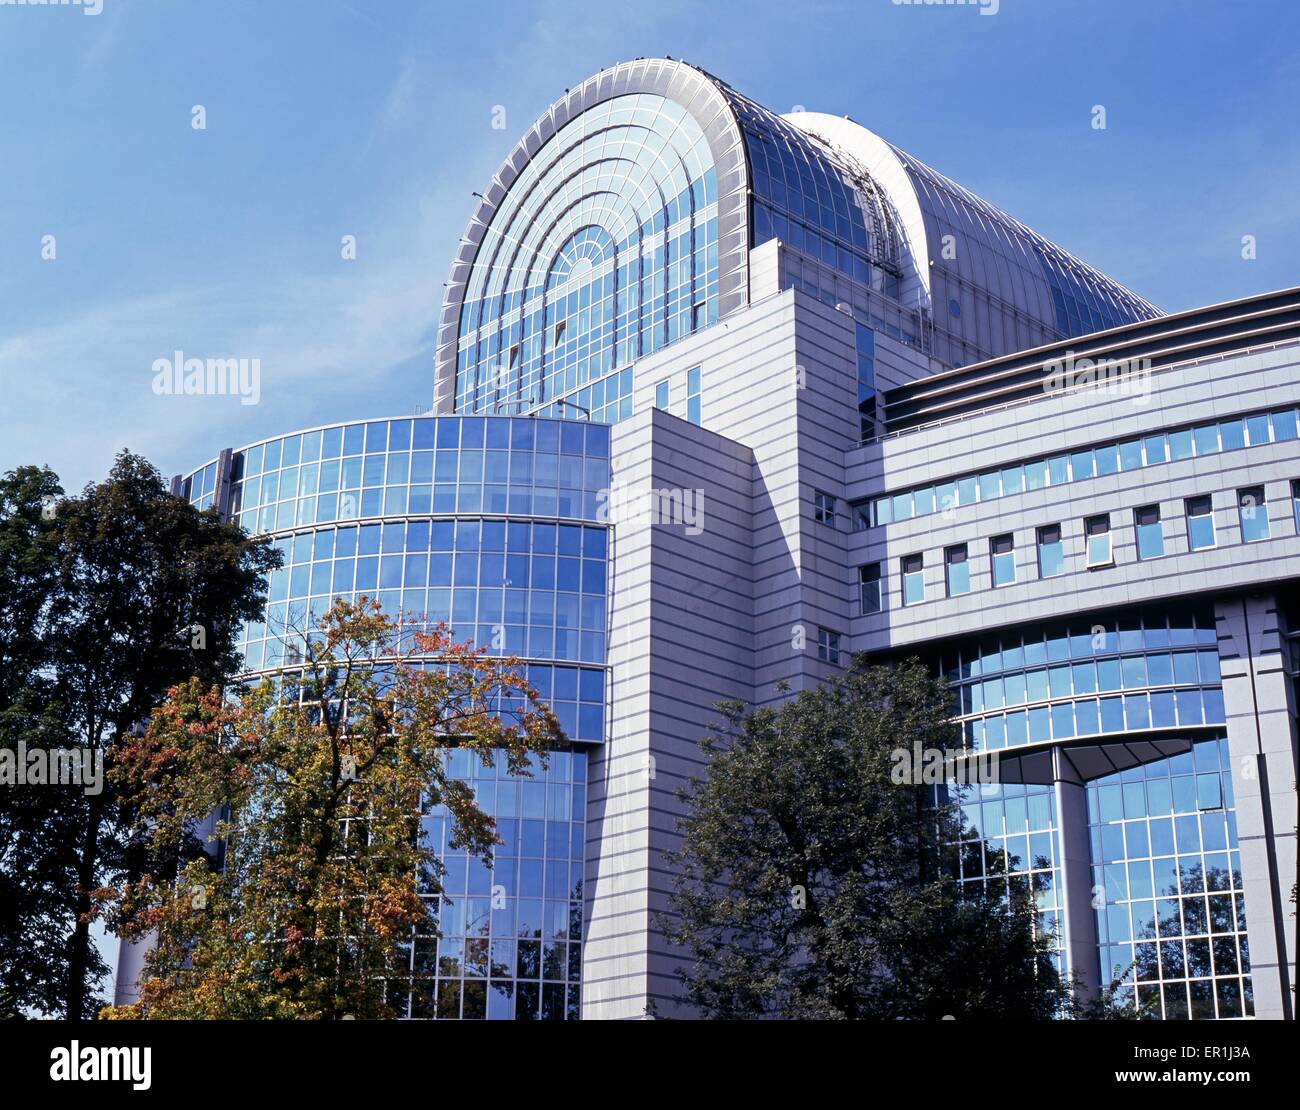 View of the EU parliament building, Brussels, Belgium, Western Europe. Stock Photo